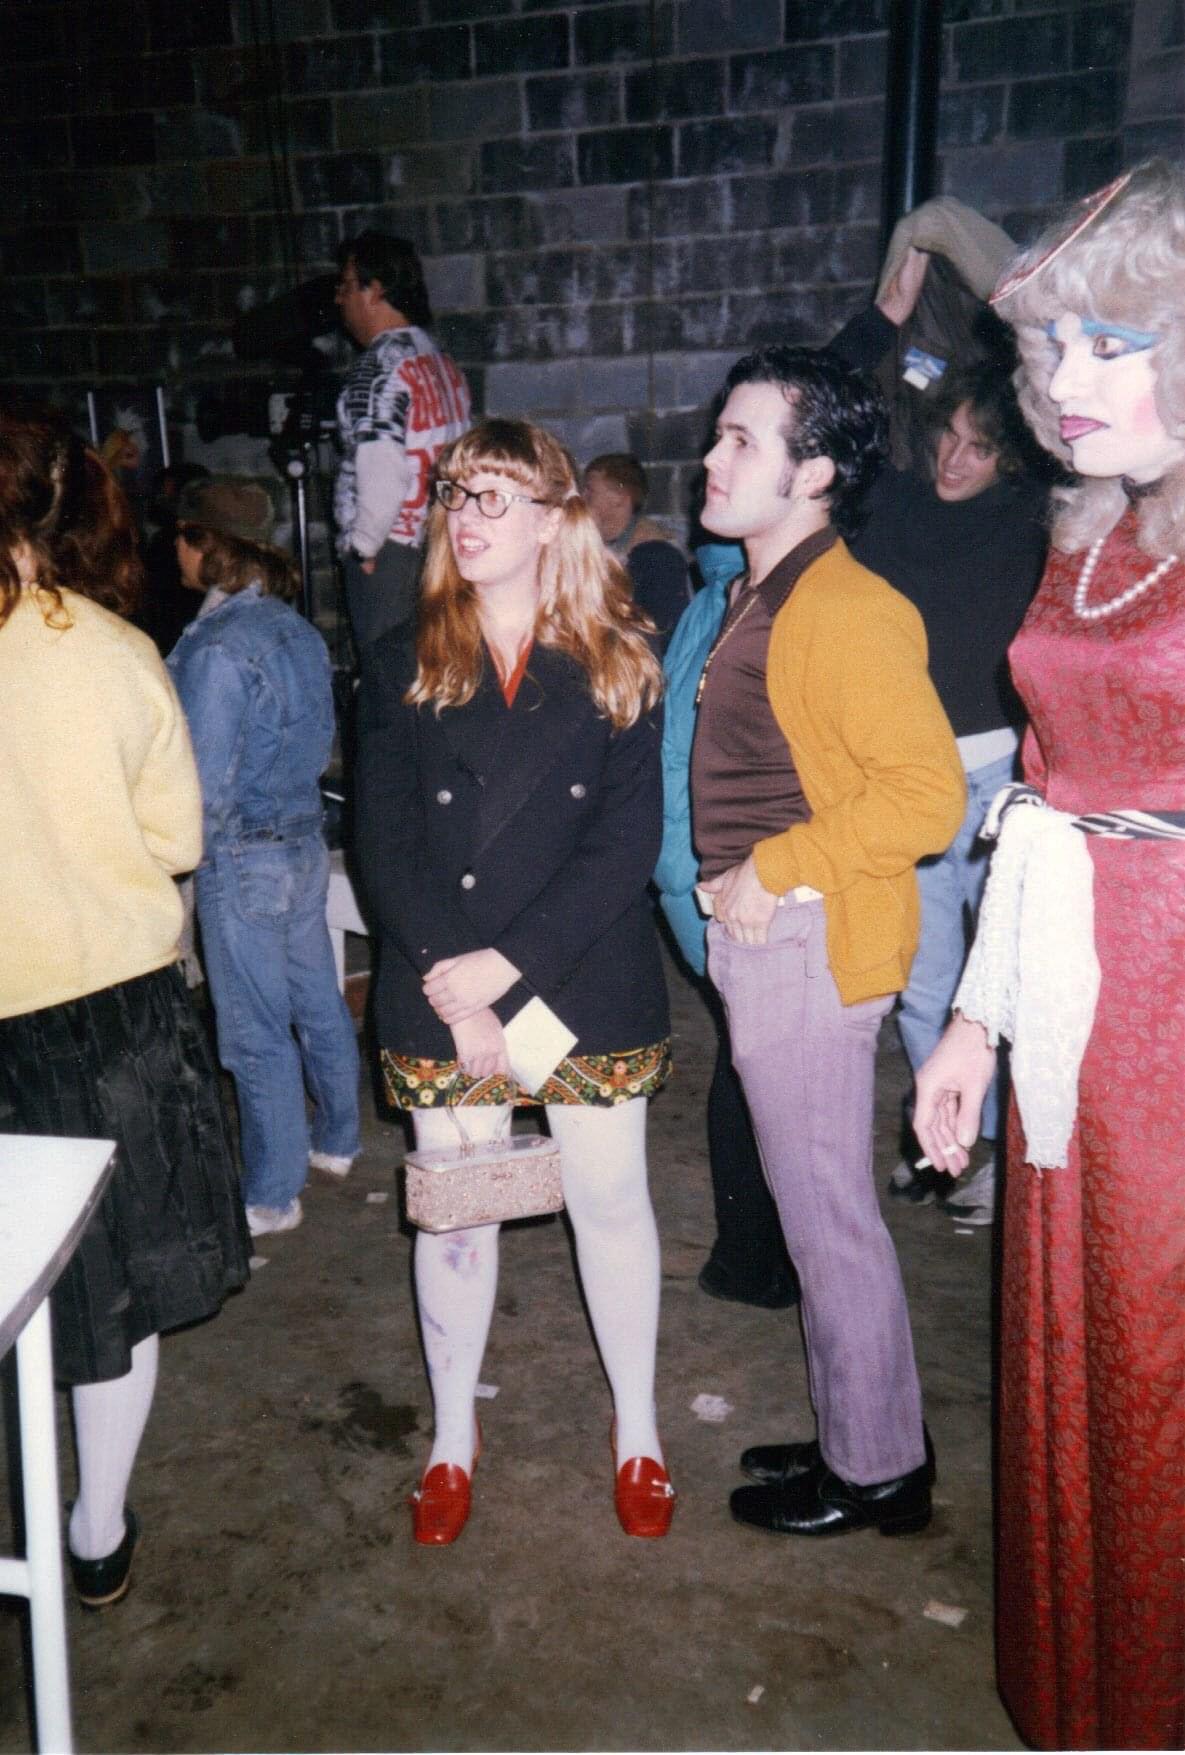 A photograph of several individuals in a dark space. One is dressed in a long red dress, a pearl necklace and a wig. Another is dressed in a dark glazer, white stockings and red shoes.